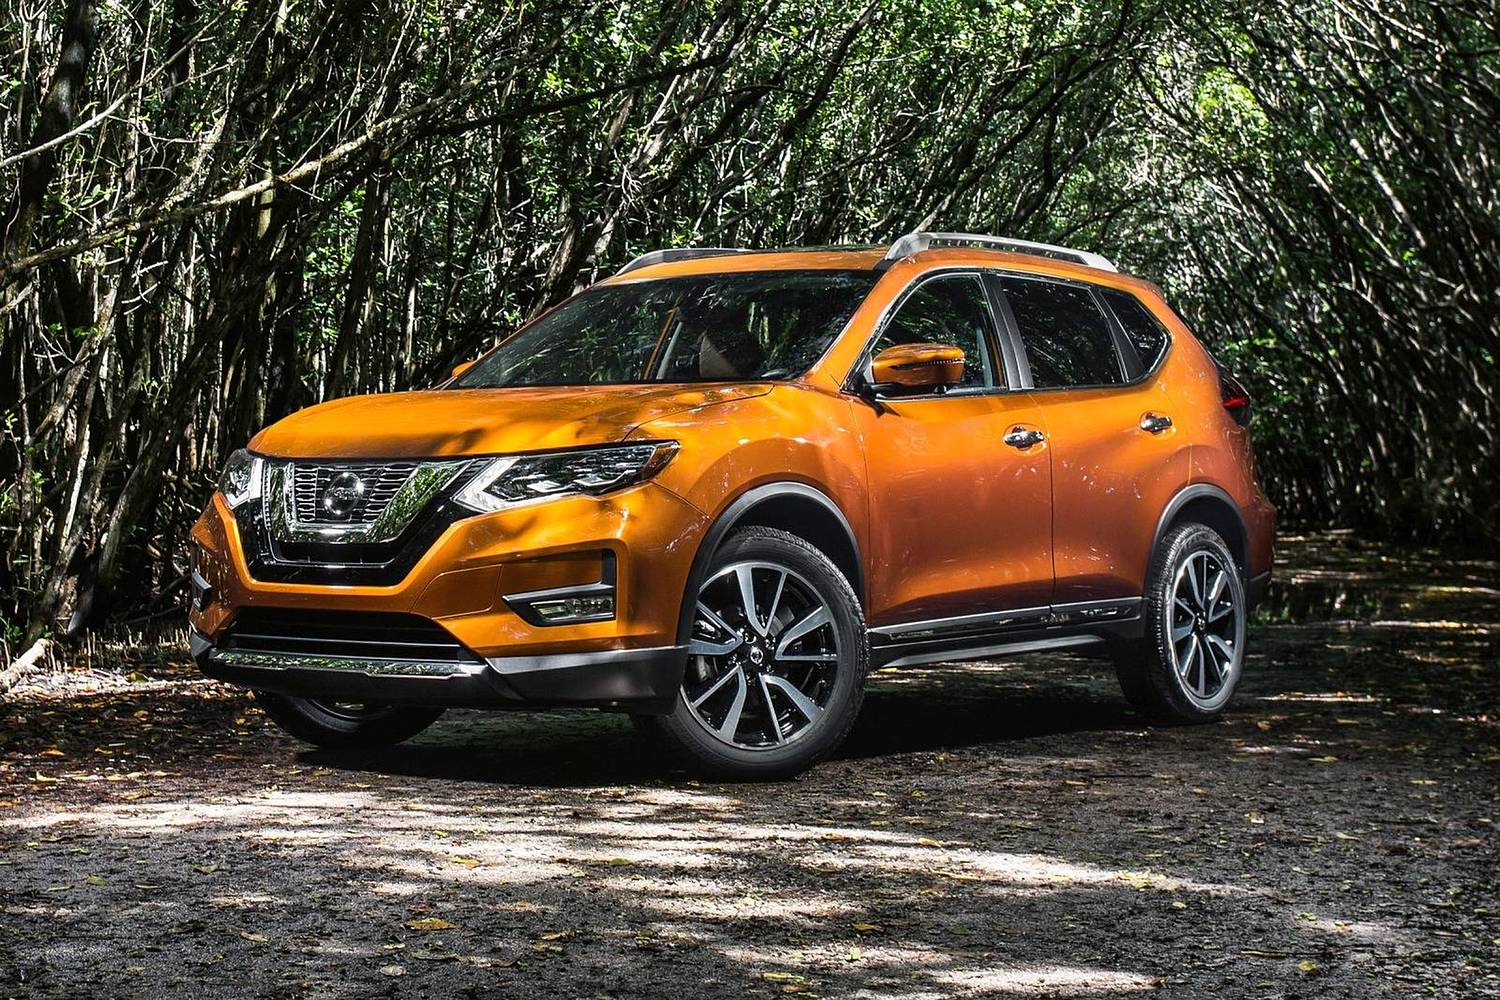 Nissan Rogue SL 4dr SUV Exterior. Platinum Package Shown. (2017 model year shown)